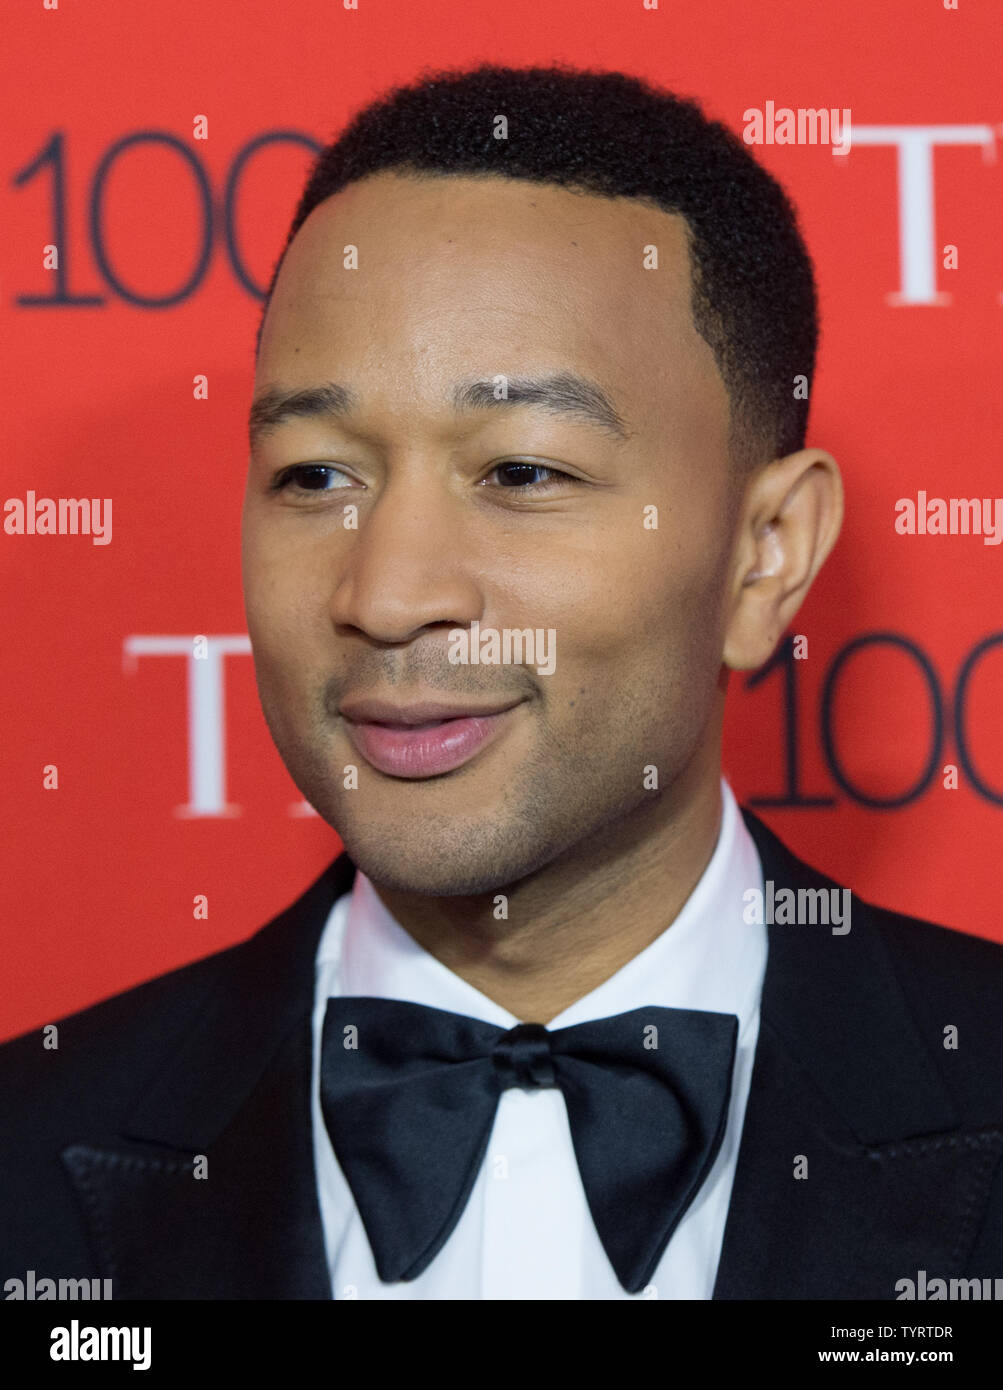 John Legend arrives on the red carpet at the TIME 100 Gala at Frederick P. Rose Hall, Home of Jazz at Lincoln Center, in New York City on April 26, 2017. TIME 100 celebrates TIME Magazine's list of the 100 Most Influential People in the World.      Photo by Bryan R. Smith/UPI Stock Photo